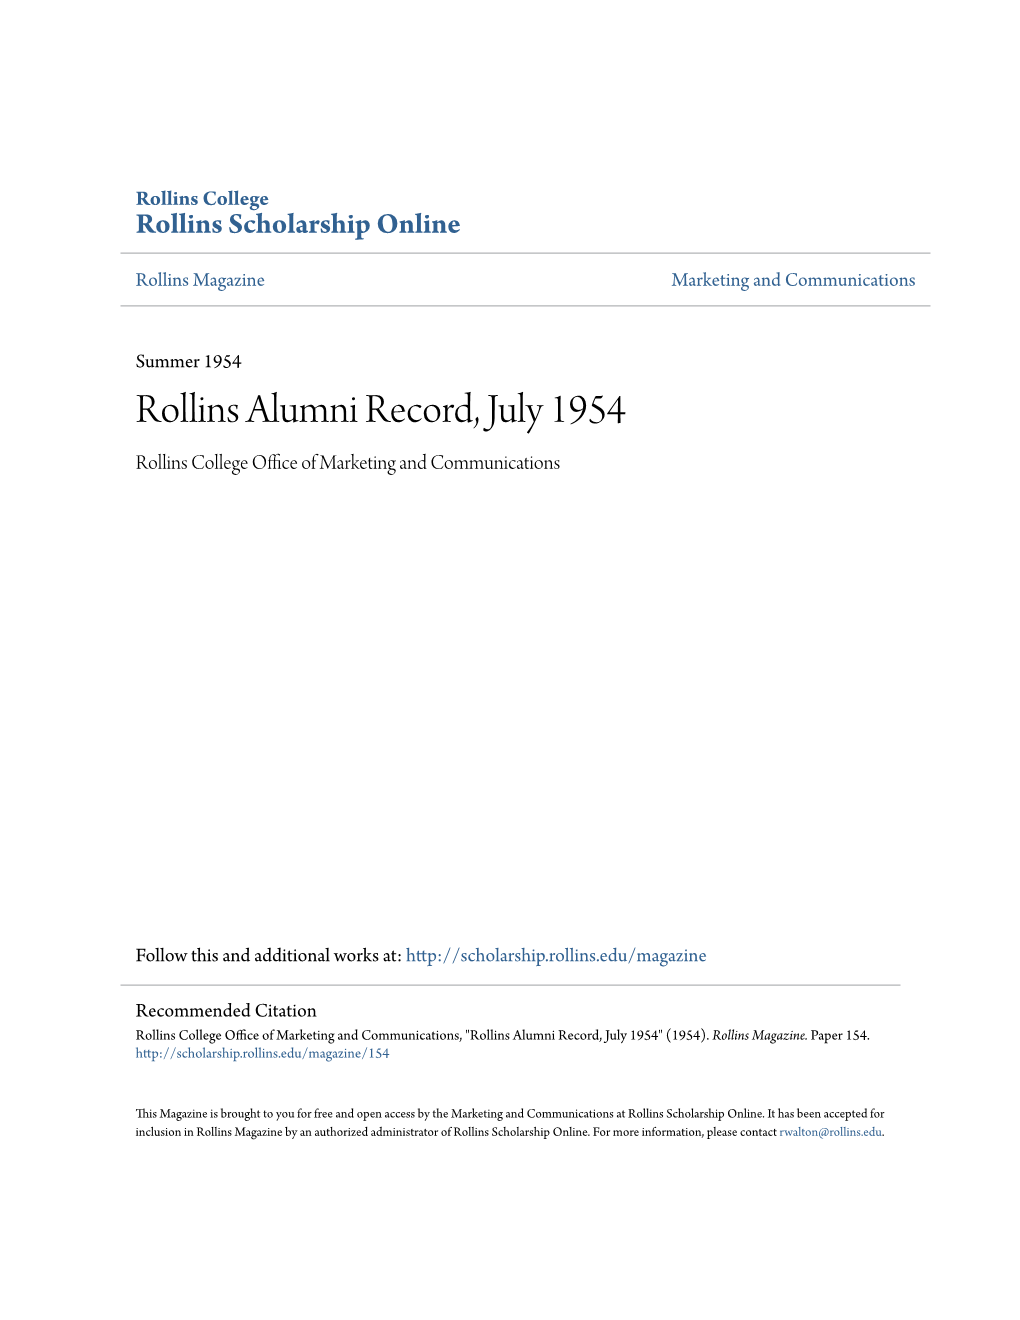 Rollins Alumni Record, July 1954 Rollins College Office Ofa M Rketing and Communications